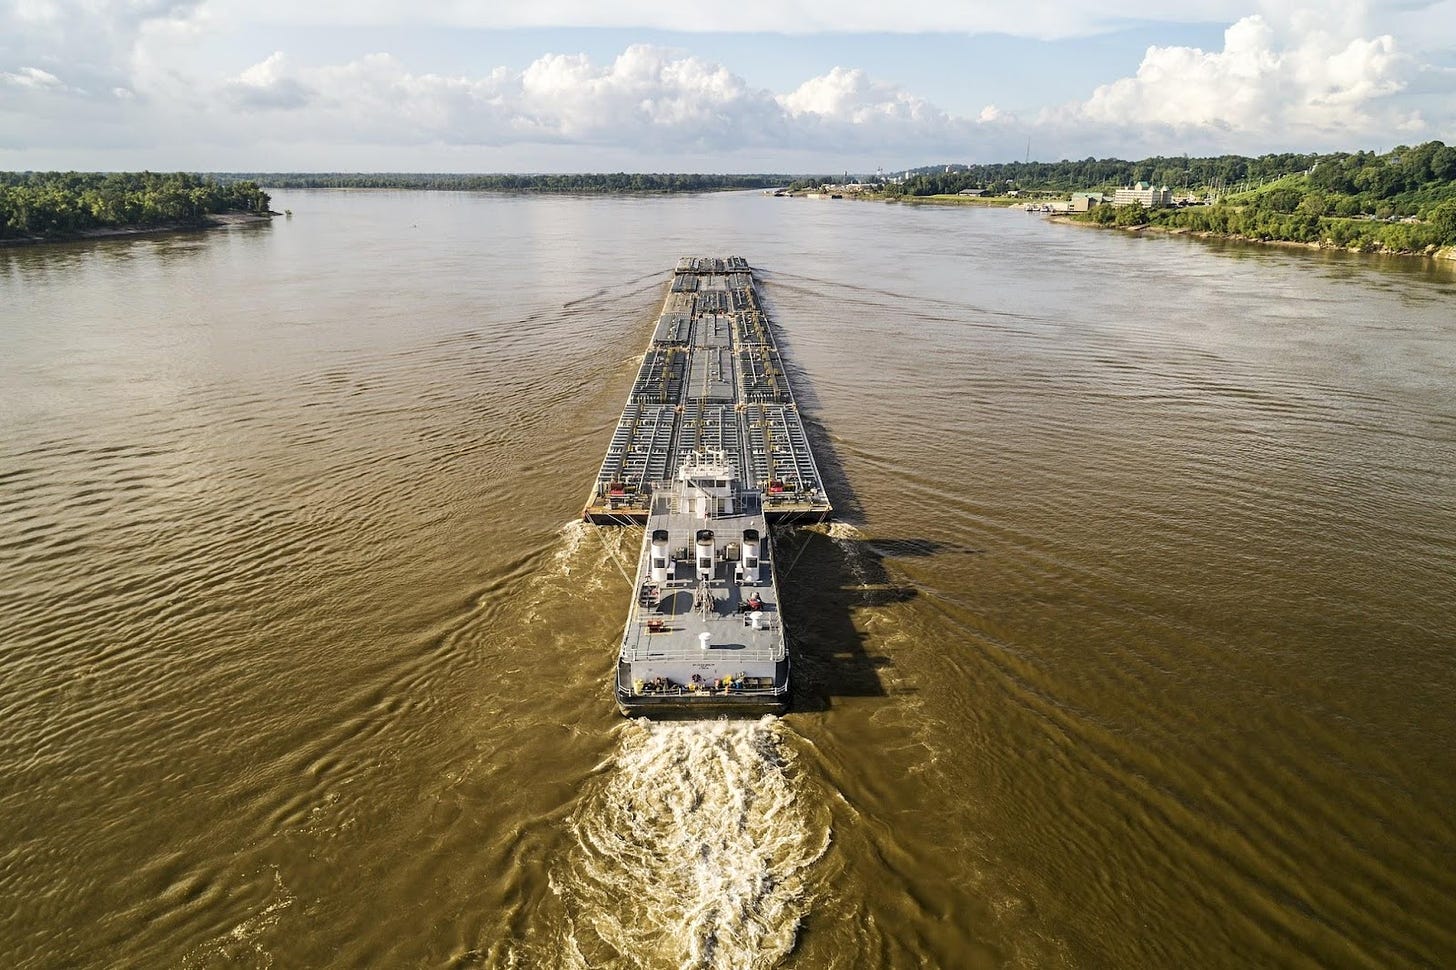 A tug boat and barges on the Mississippi River. Image from Unsplash.